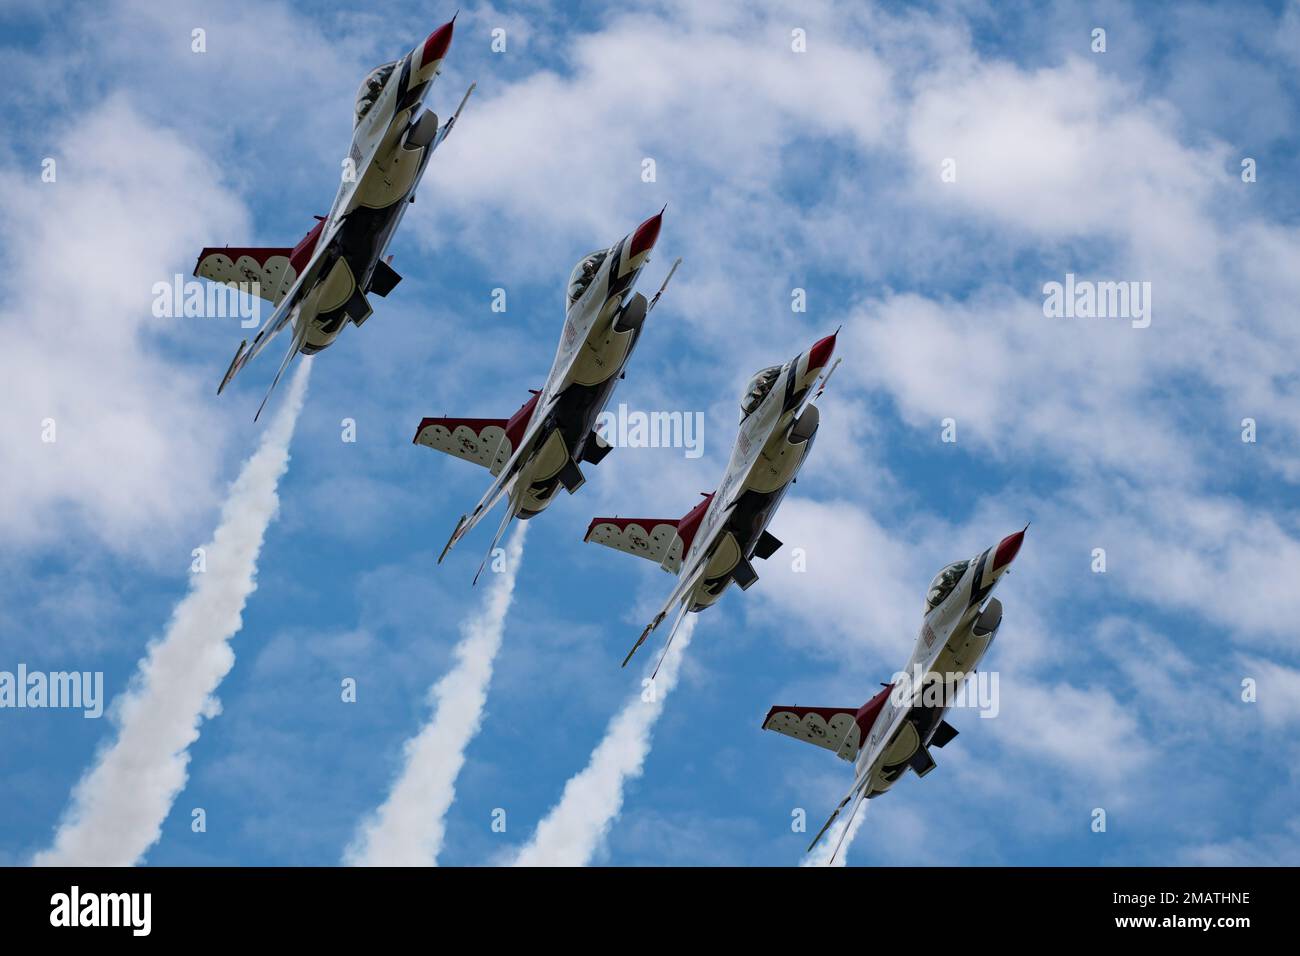 The United States Air Force Air Demonstration Squadron, known as the